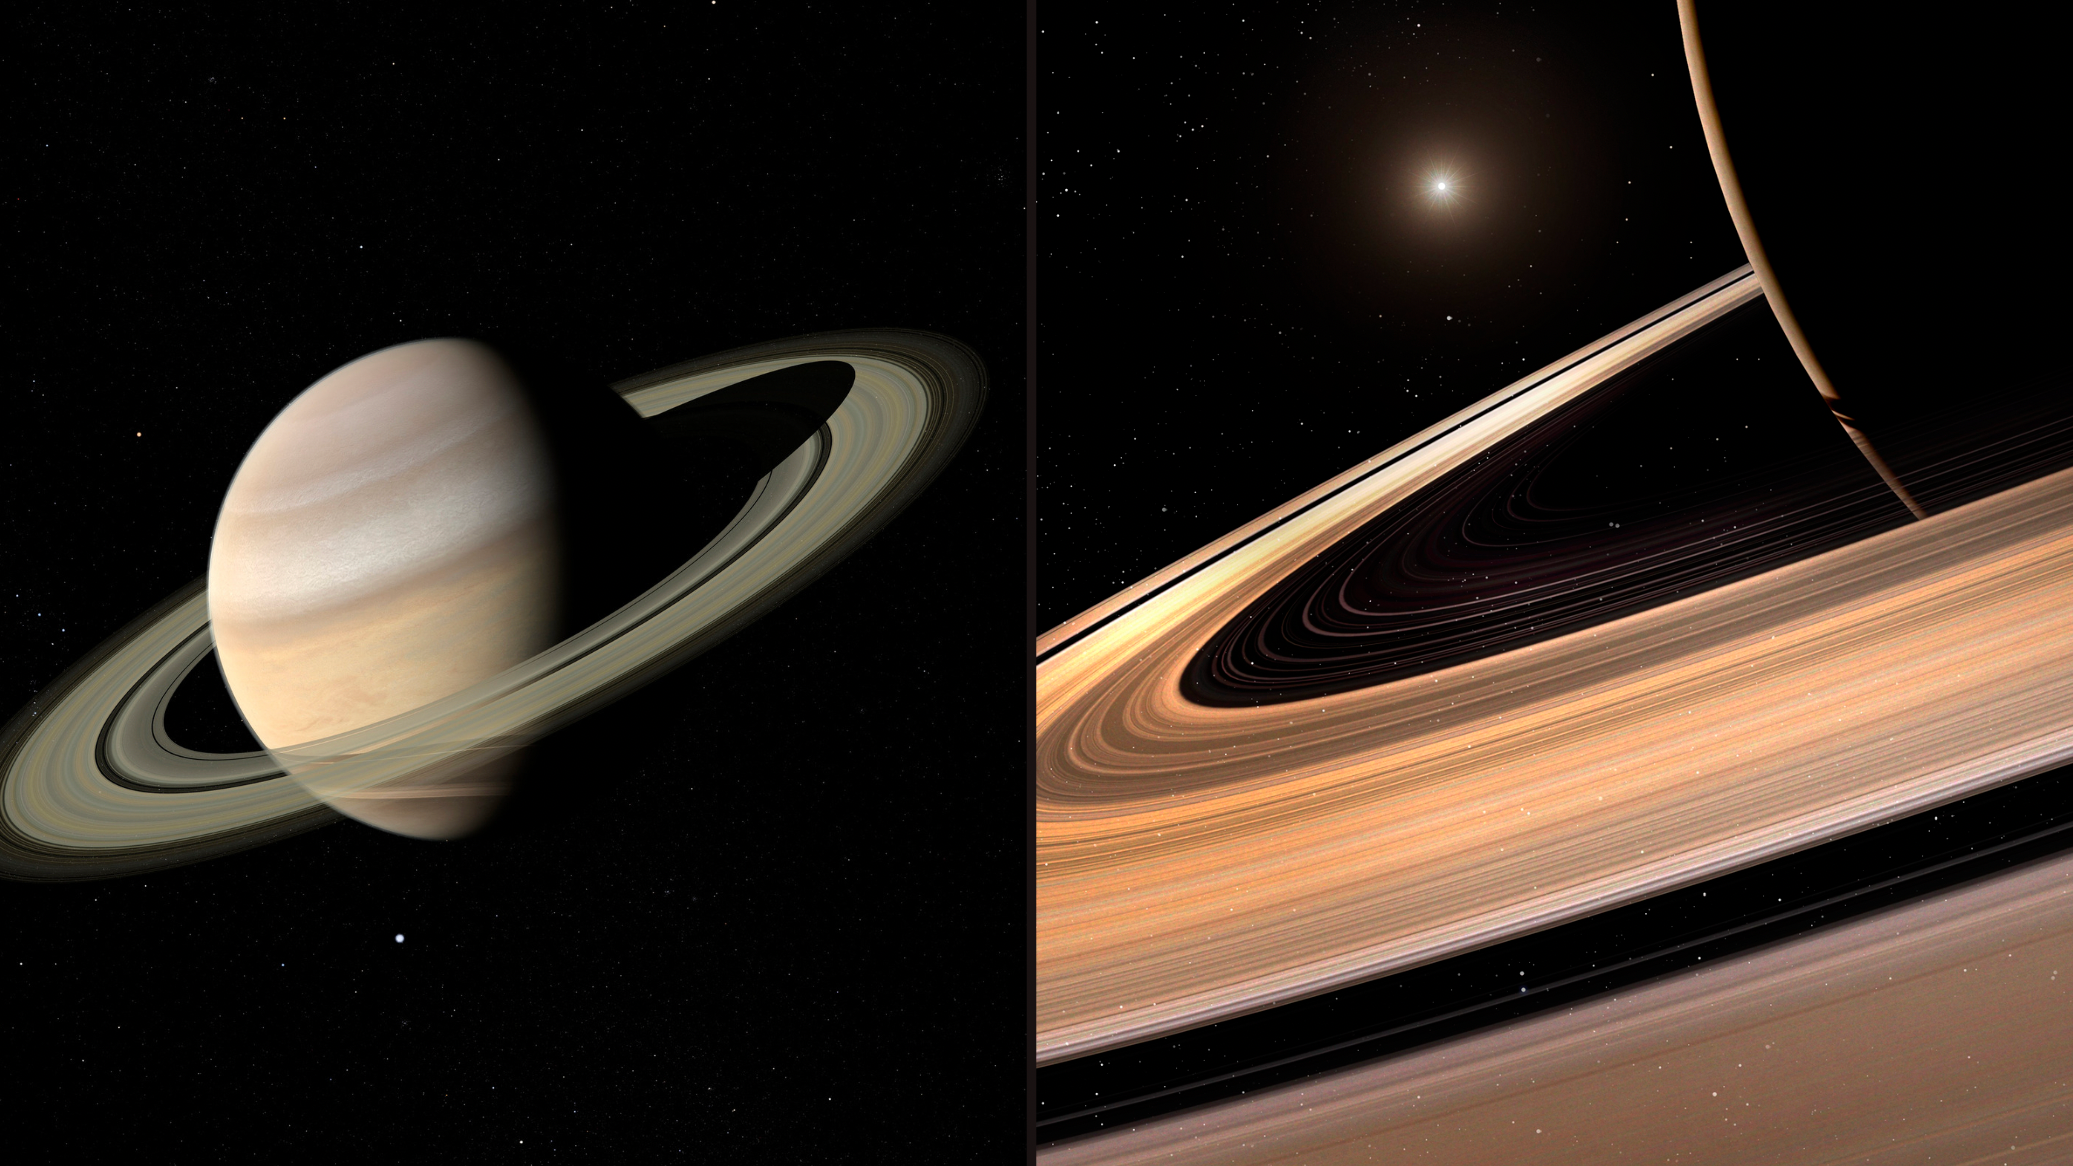 Aurorae in Saturn sky? It's probably due to high altitude winds, says study